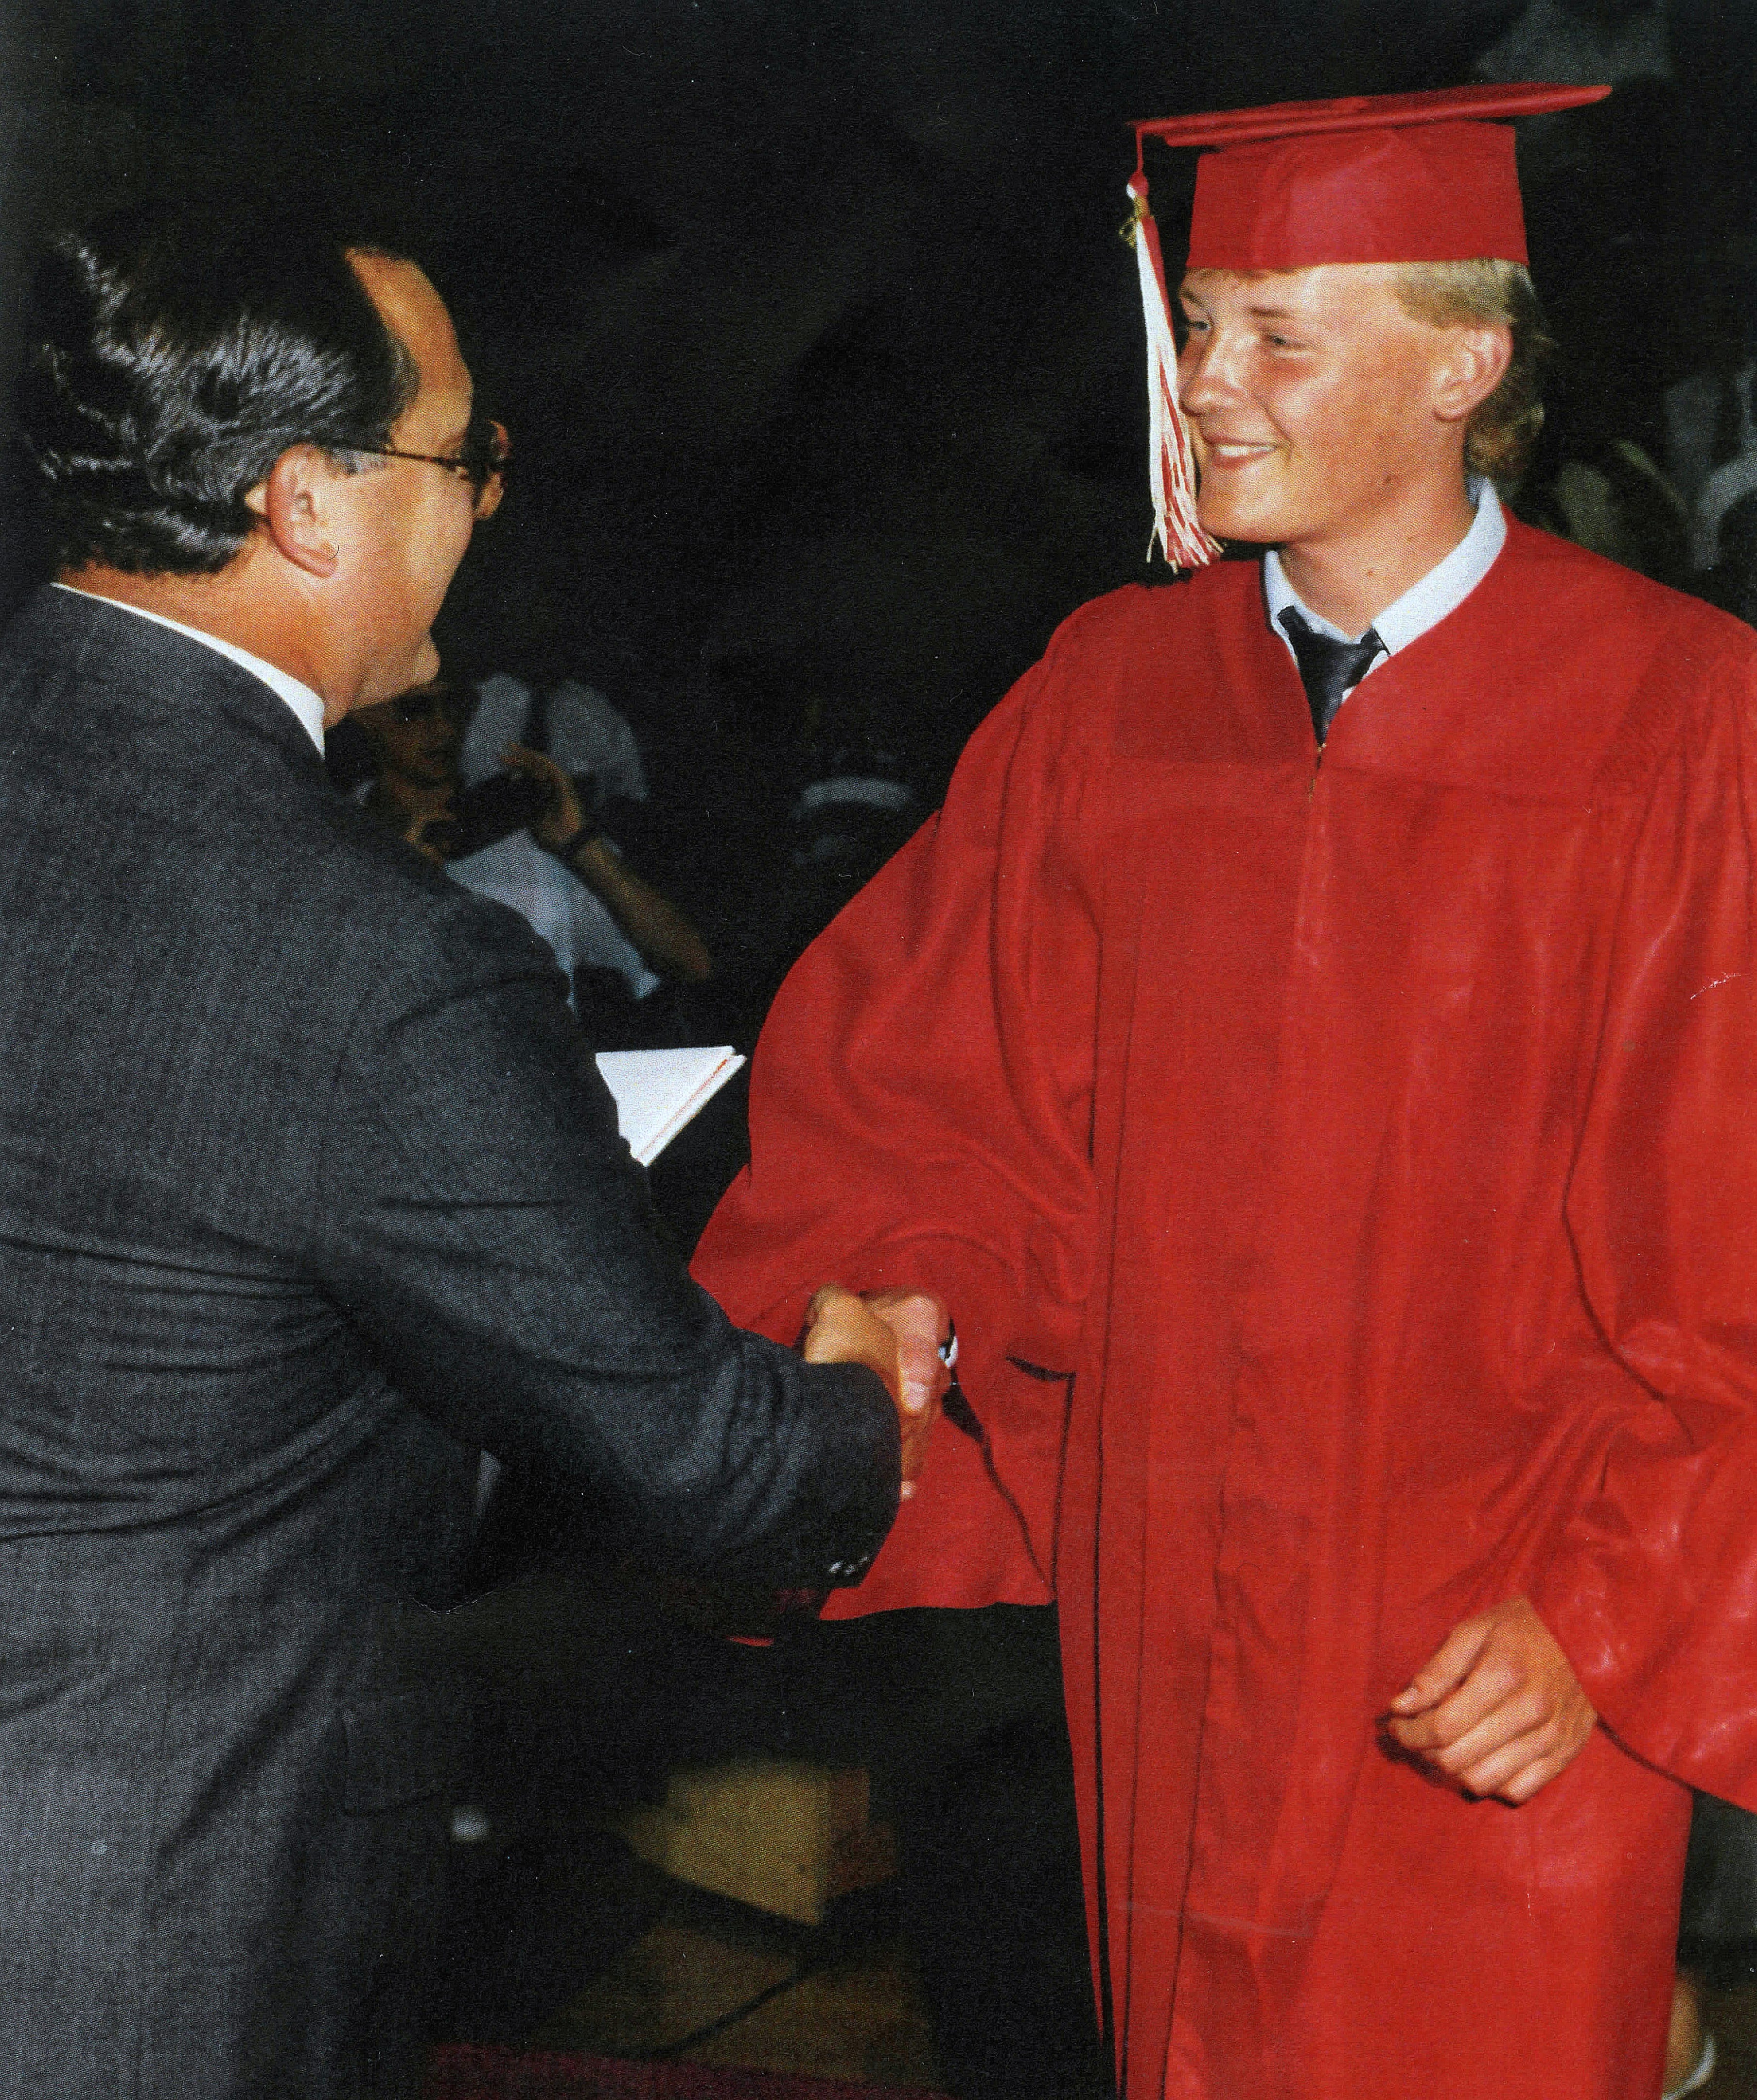 Paul Schmidt graduates from Wauwatosa East in 1988.